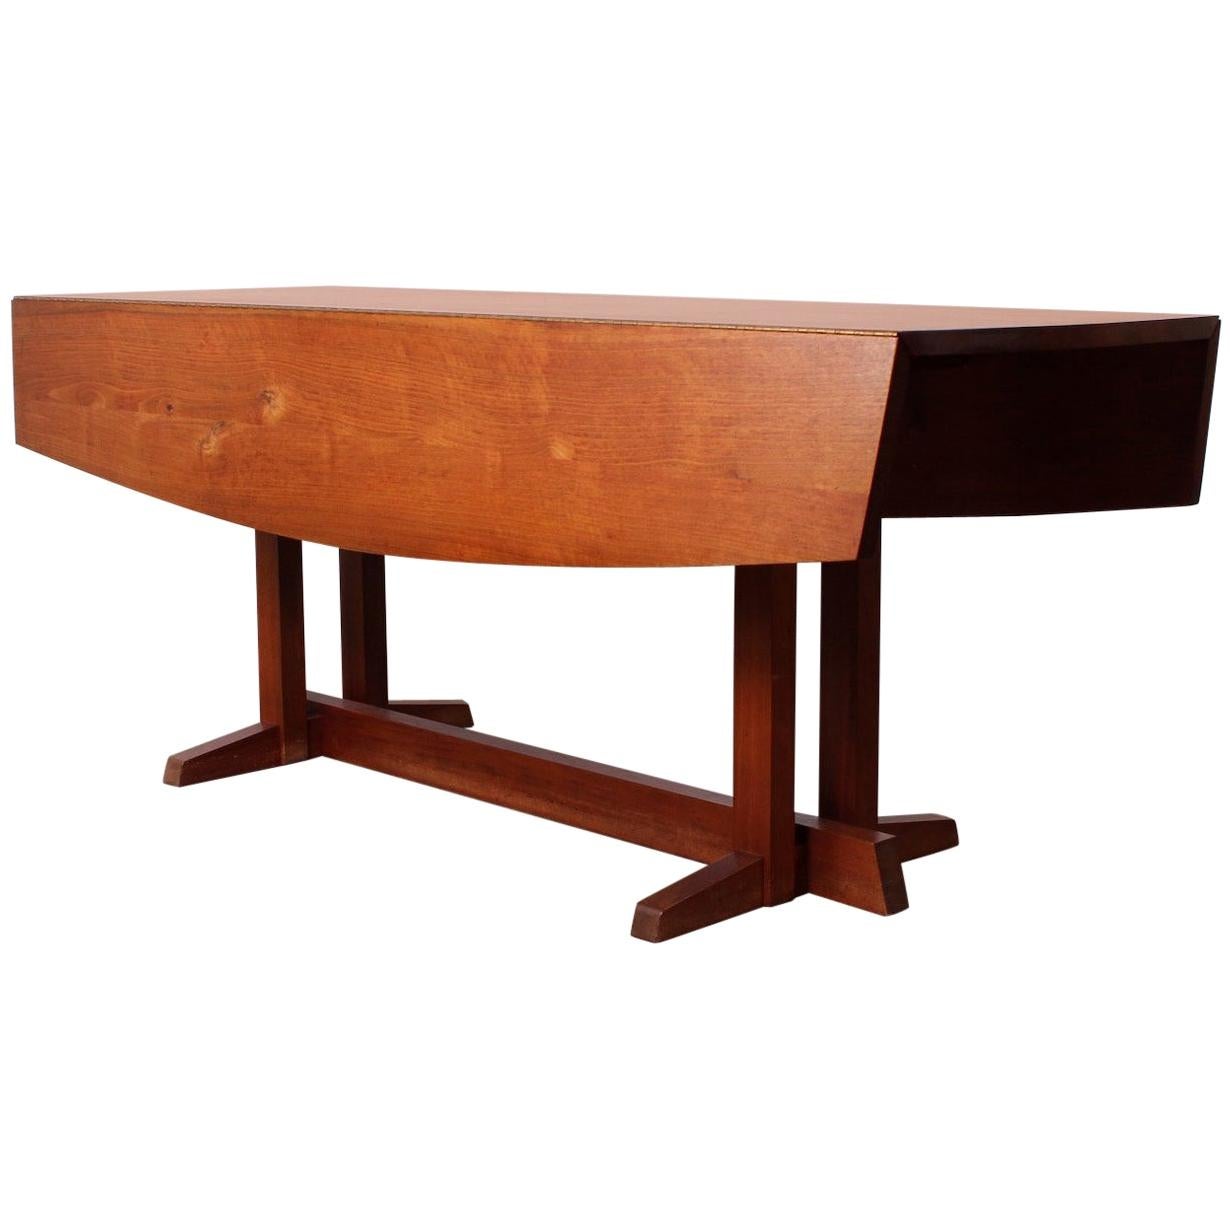 George Nakashima Frenchman's Cove Console / Dining Table, 1967